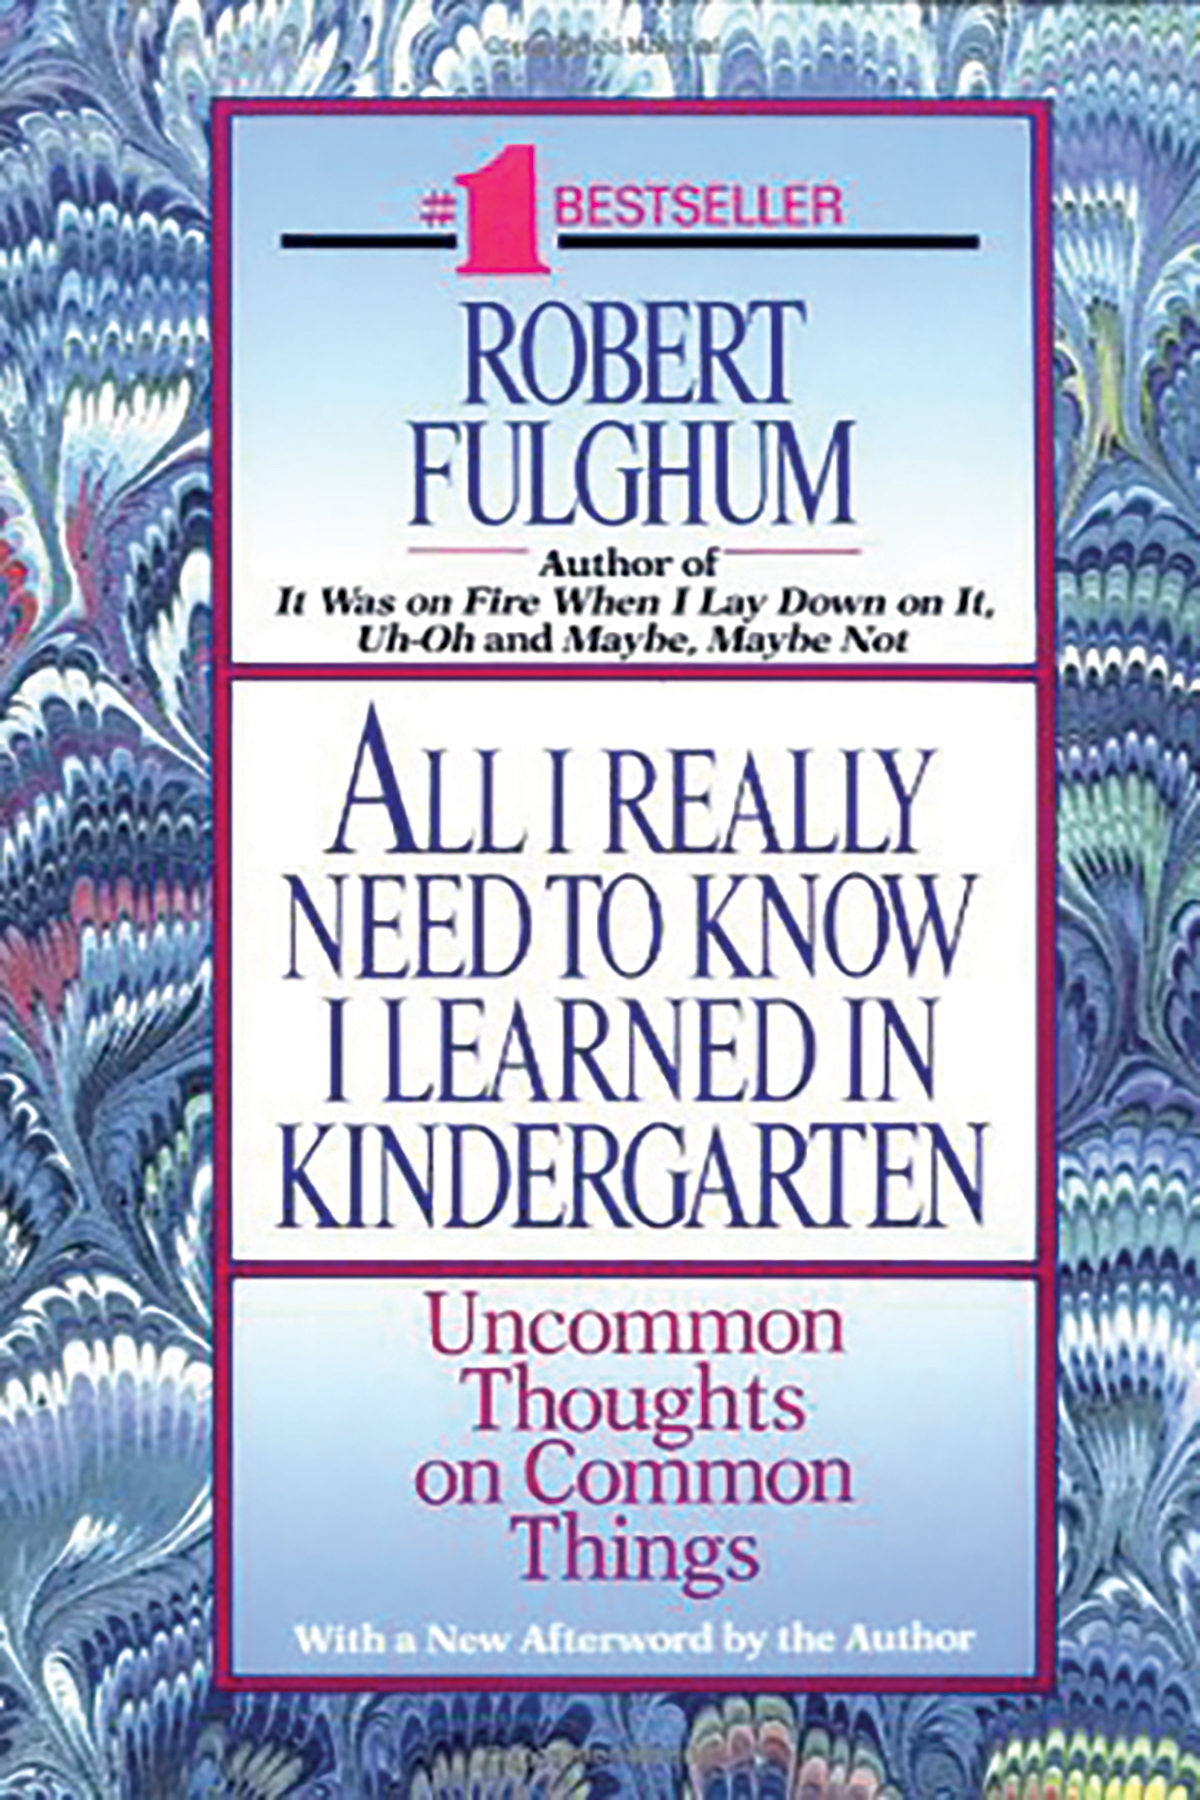 Robert Fulghum -All I really Need to Know I learned in Kindergarden